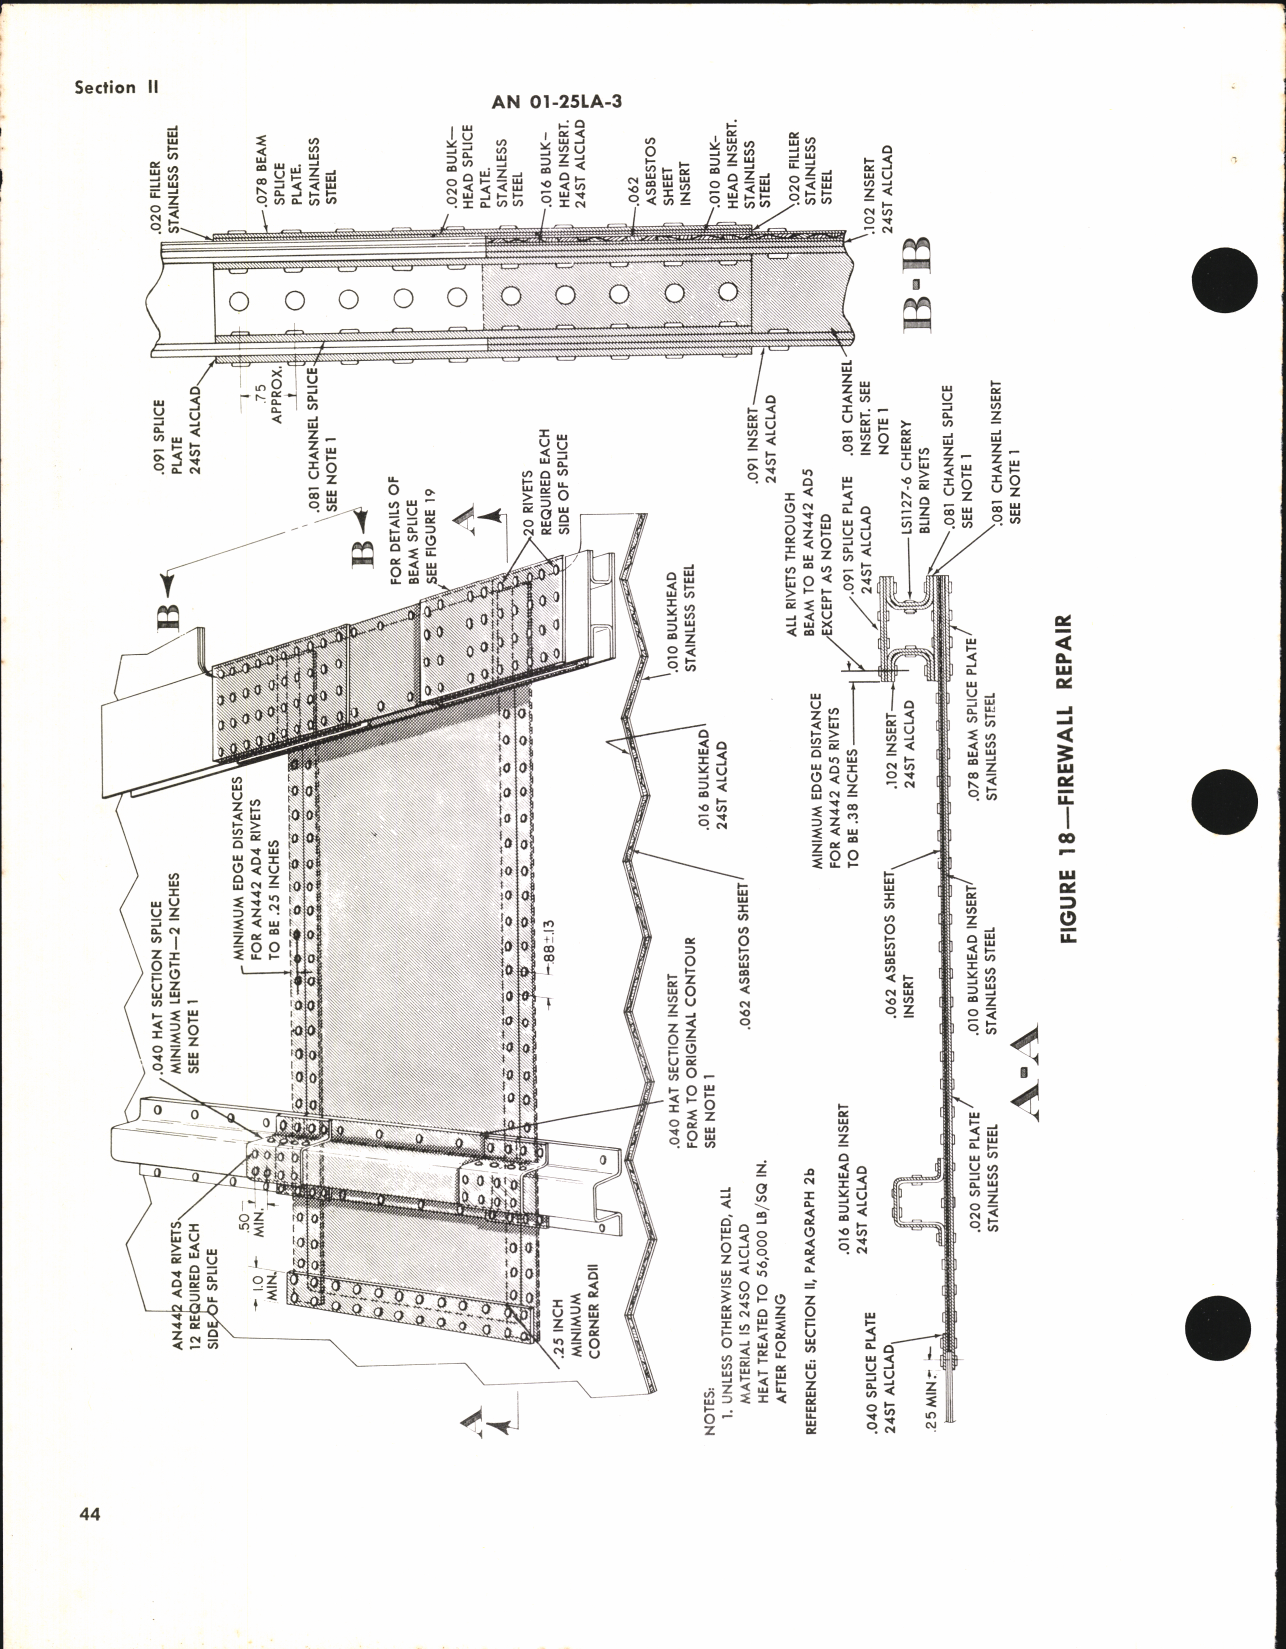 Sample page 6 from AirCorps Library document: Structural Repair Instructions for C-46, ZC-46A, C-46D, and C-46F